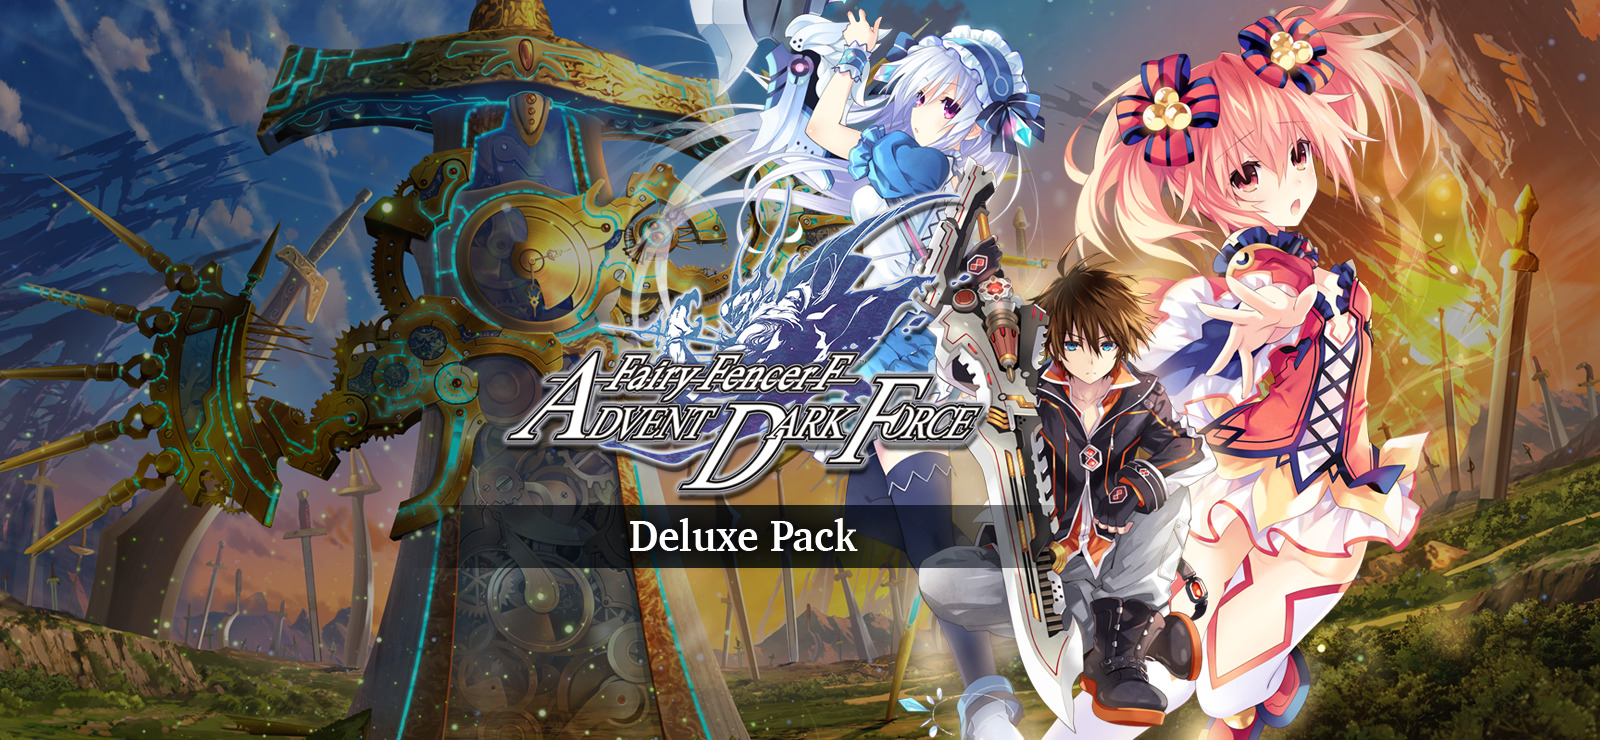 Fairy Fencer F: Advent Dark Force - Deluxe Pack on 